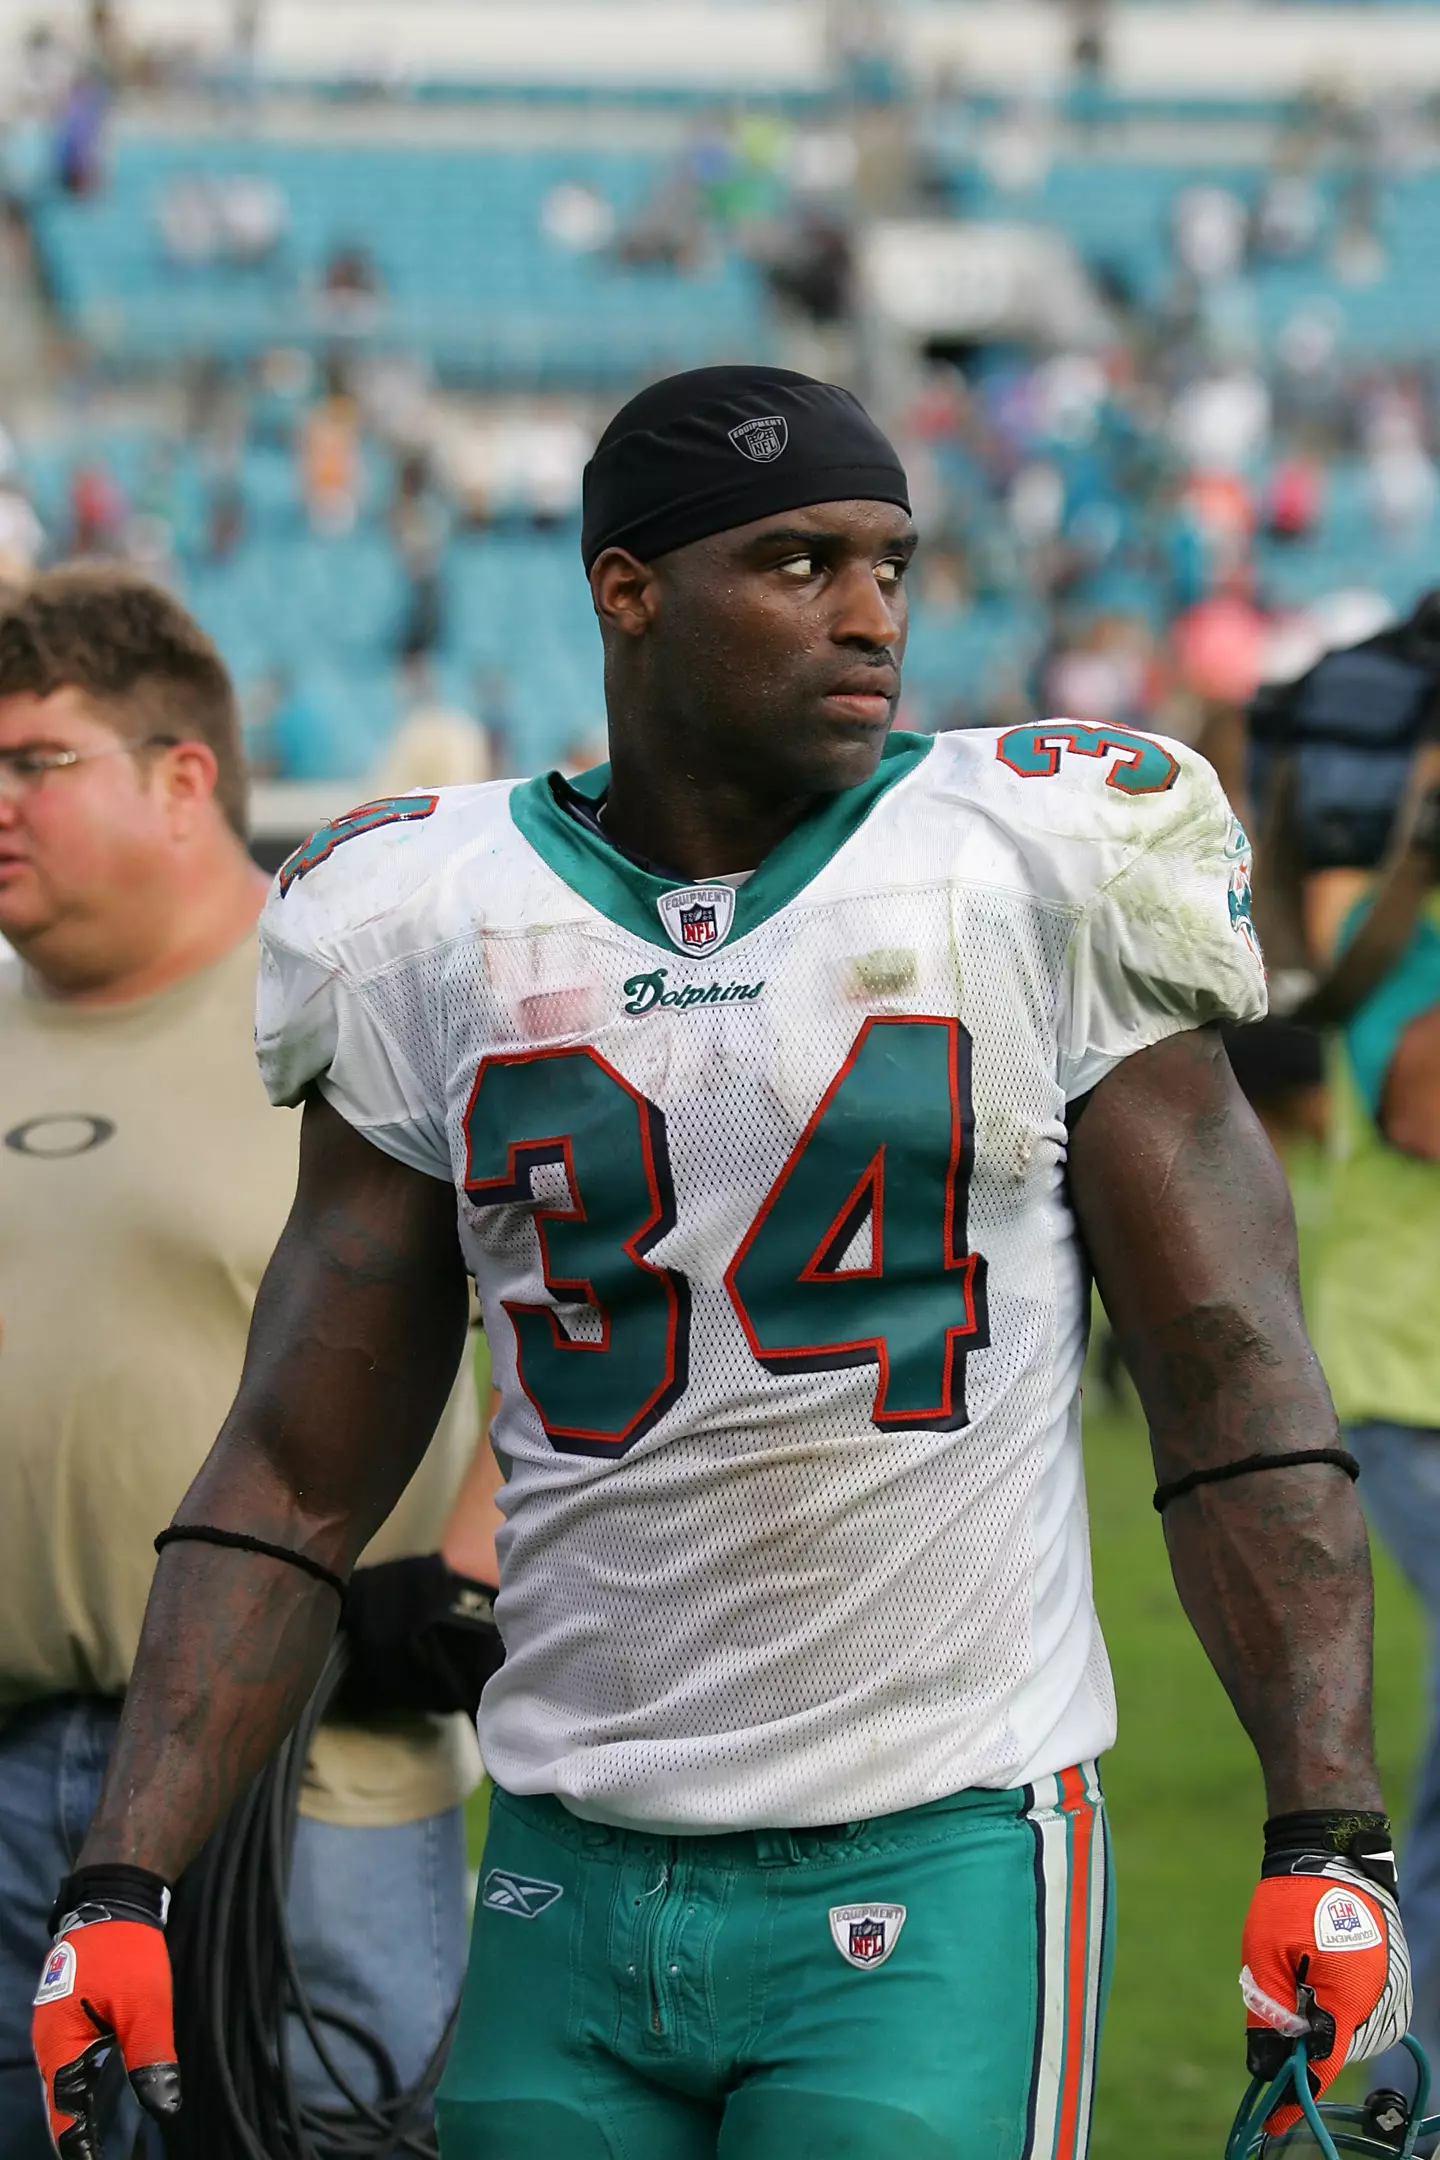 Ricky had an incredible career with the Miami Dolphins.